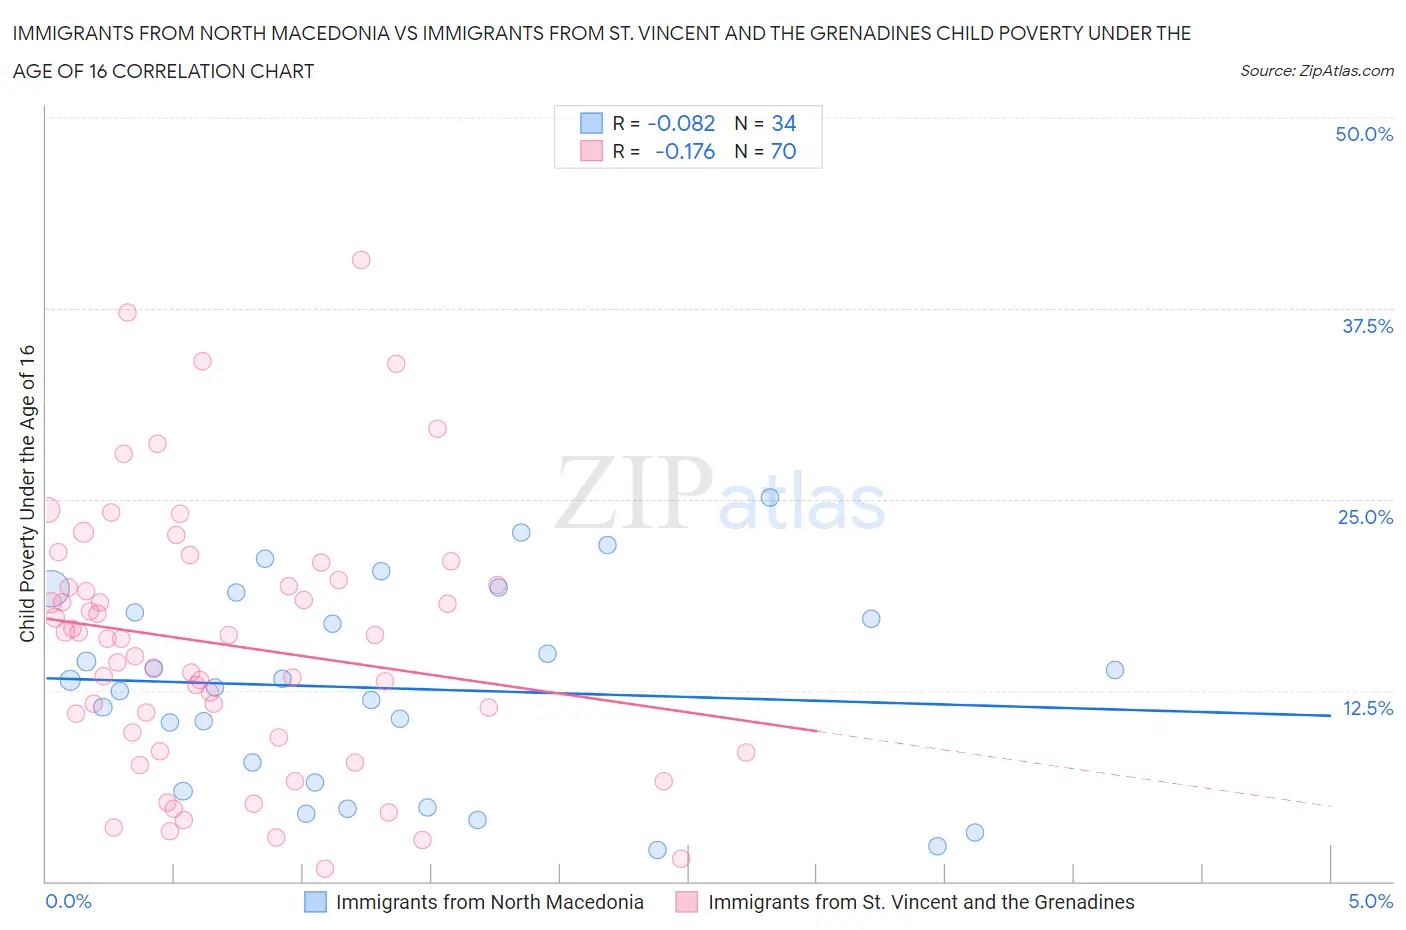 Immigrants from North Macedonia vs Immigrants from St. Vincent and the Grenadines Child Poverty Under the Age of 16